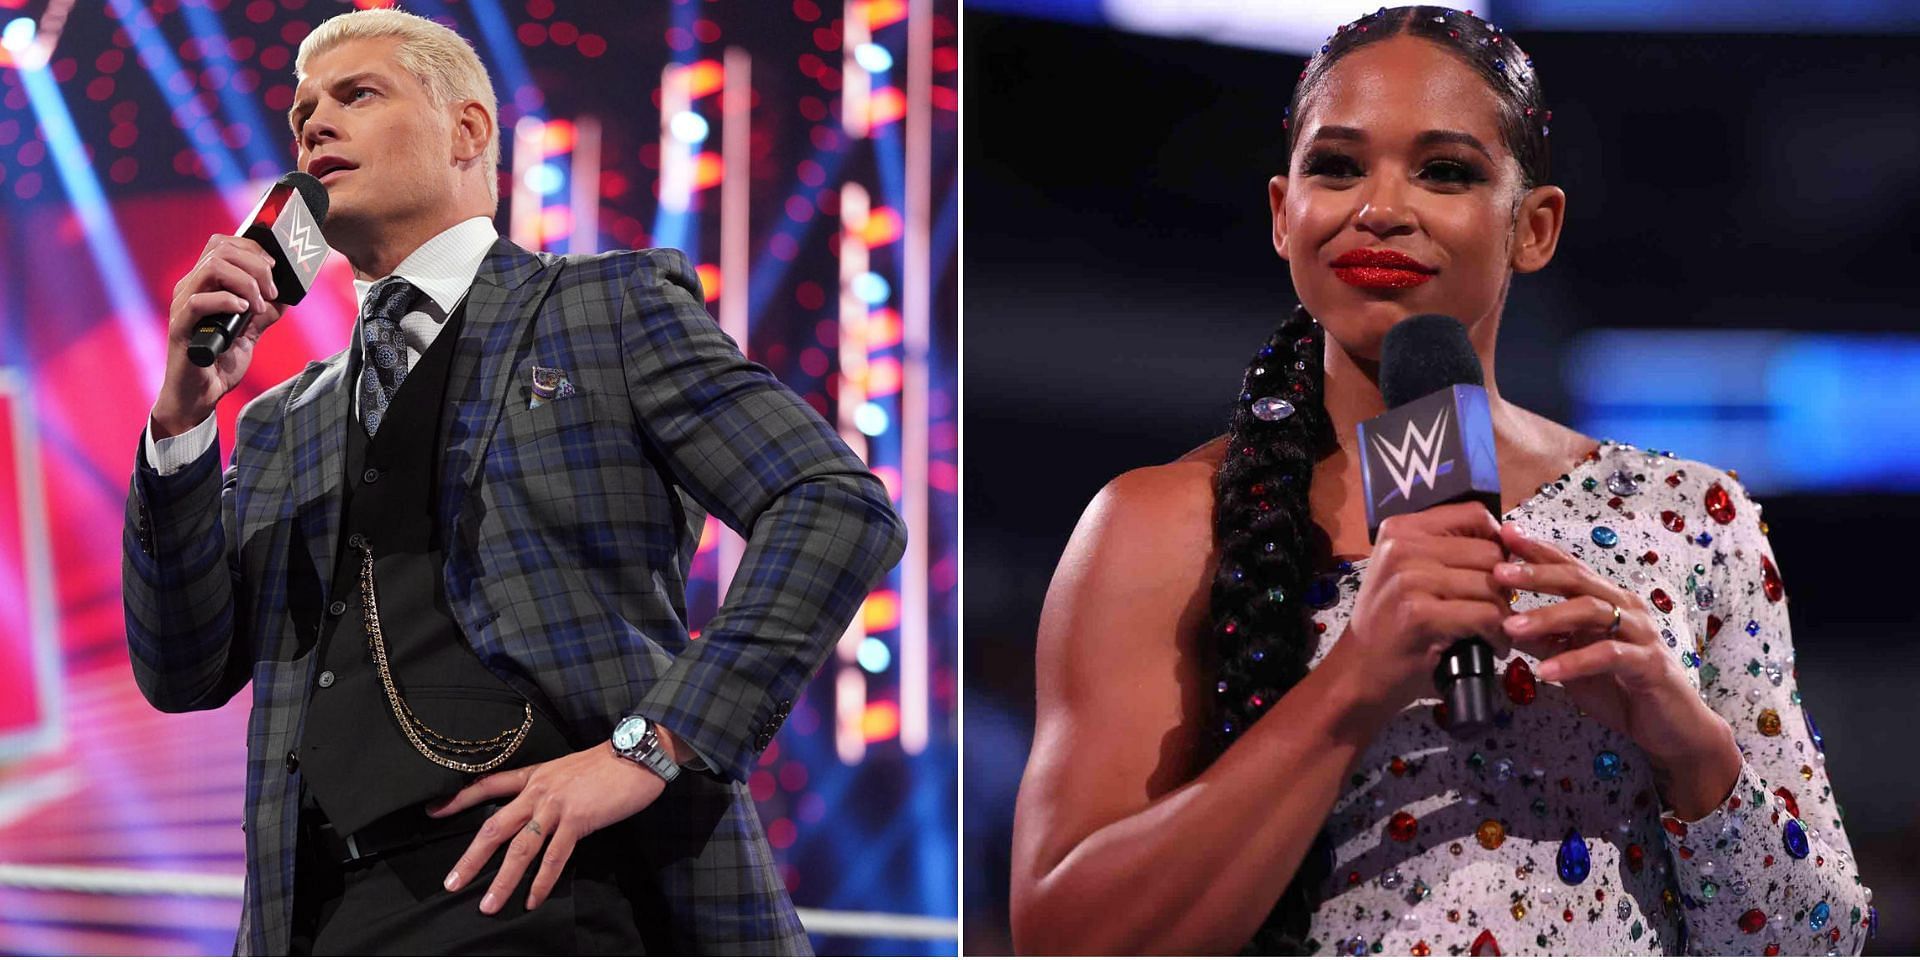 Bianca Belair felt bad for Cody Rhodes and another star